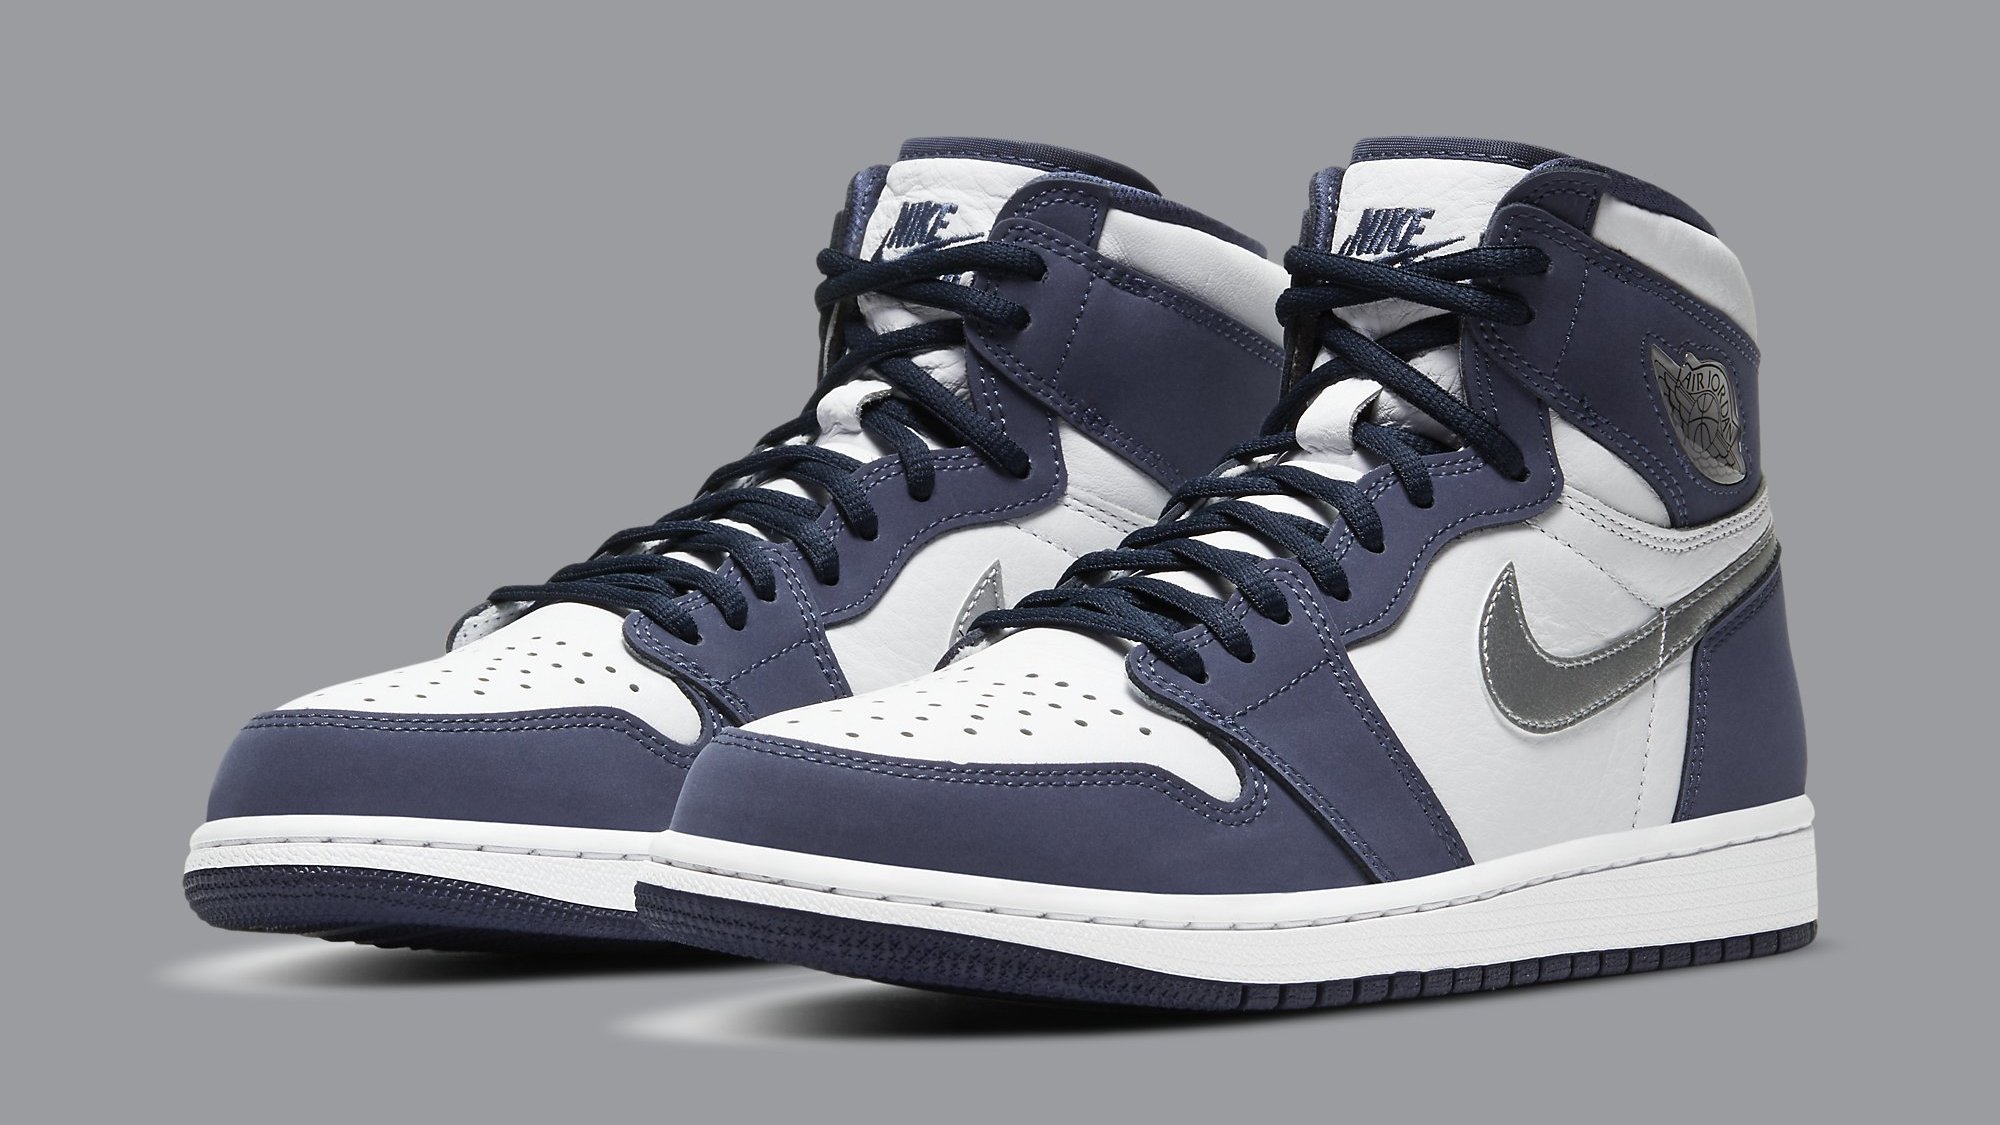 New Release Date For the Air Jordan 1 High CO.JP 'Midnight Navy